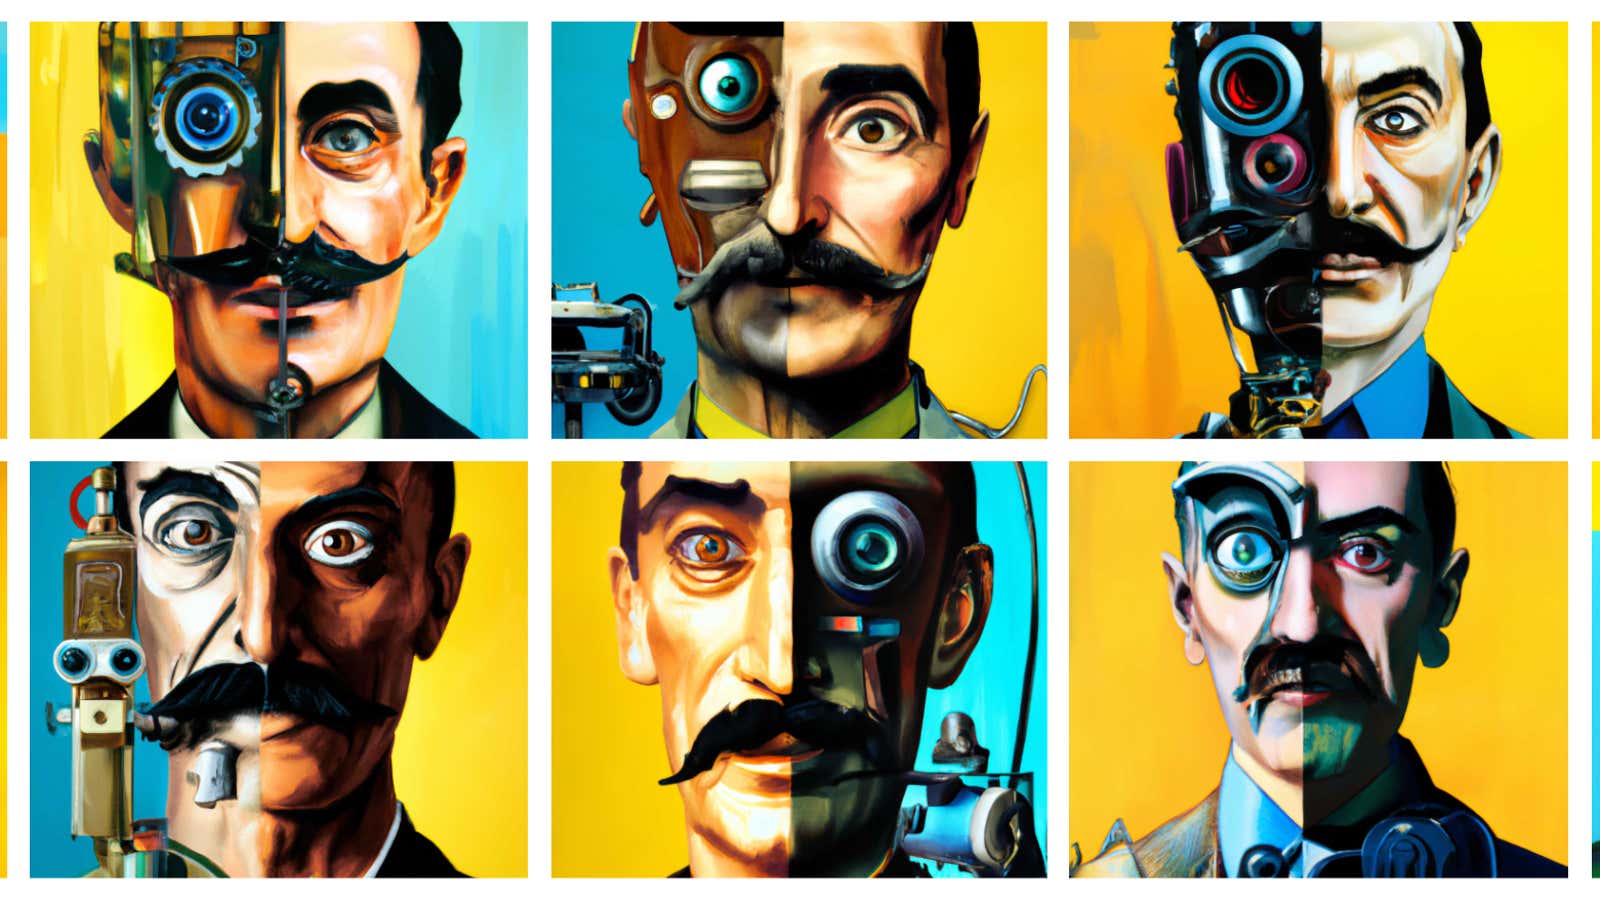 A set of 10 AI-generated variations on a self-portrait by Salvador Dalí